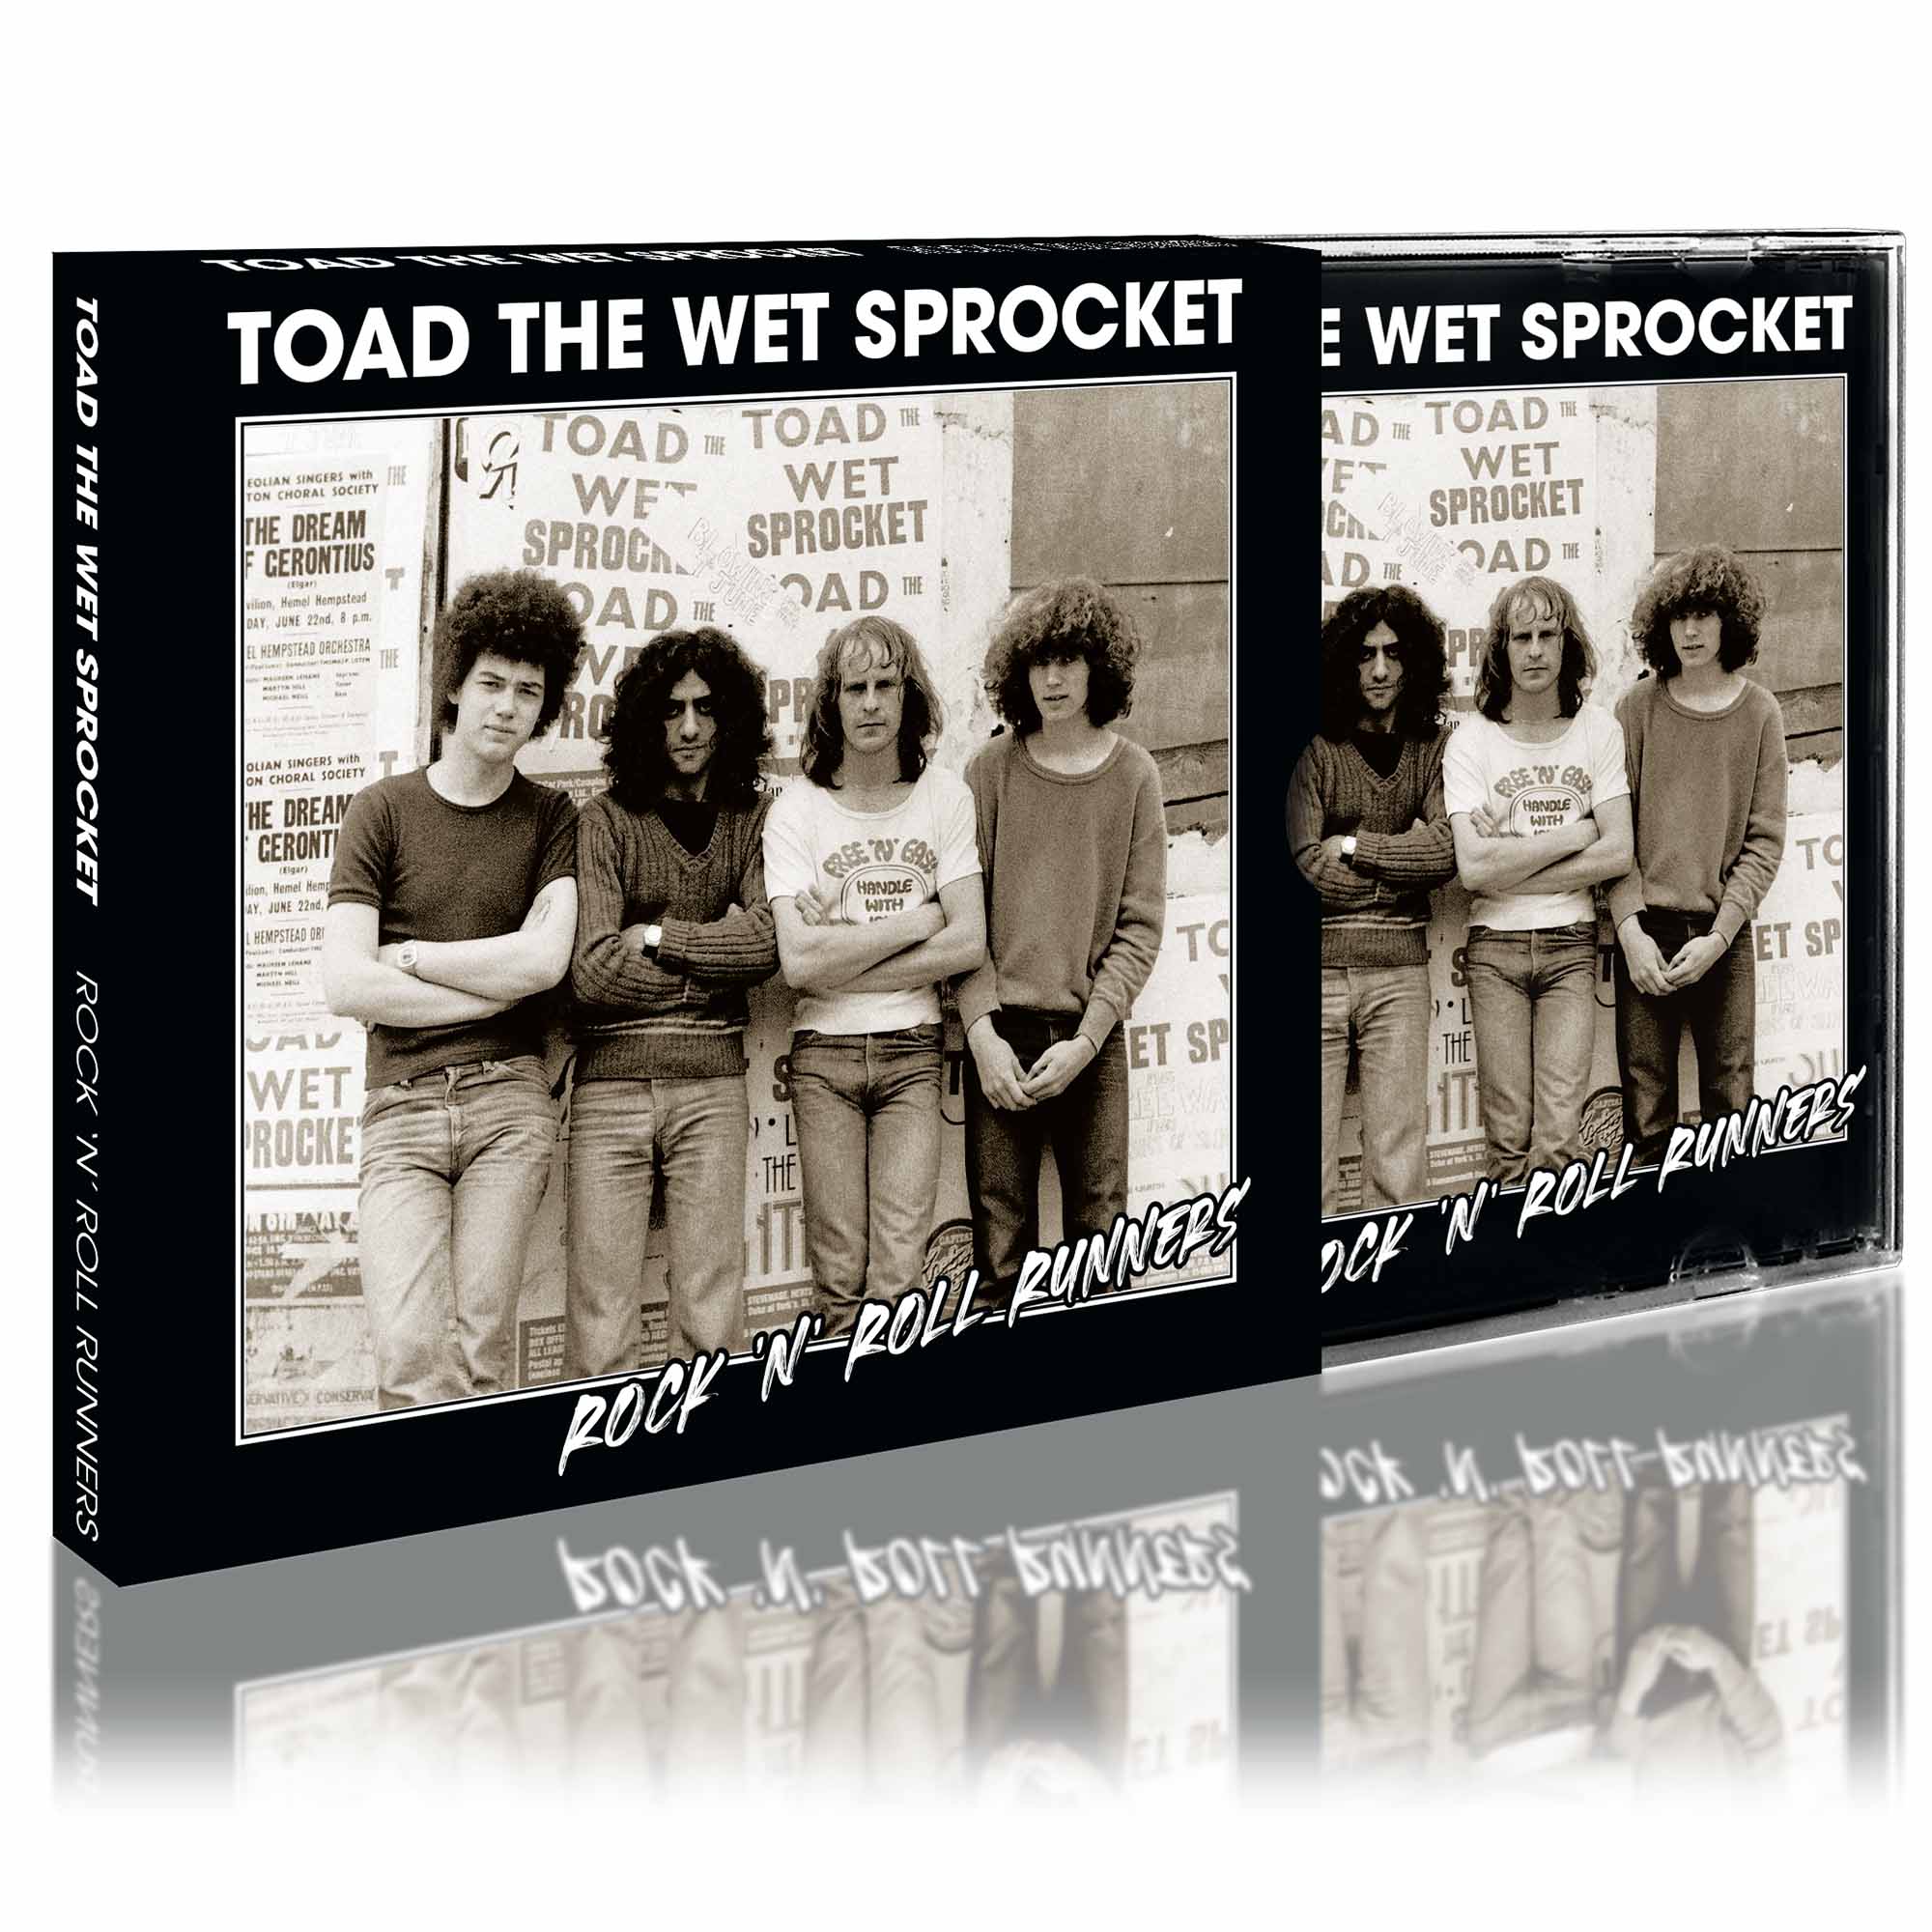 TOAD THE WET SPROCKET - Rock 'n' Roll Runners  CD